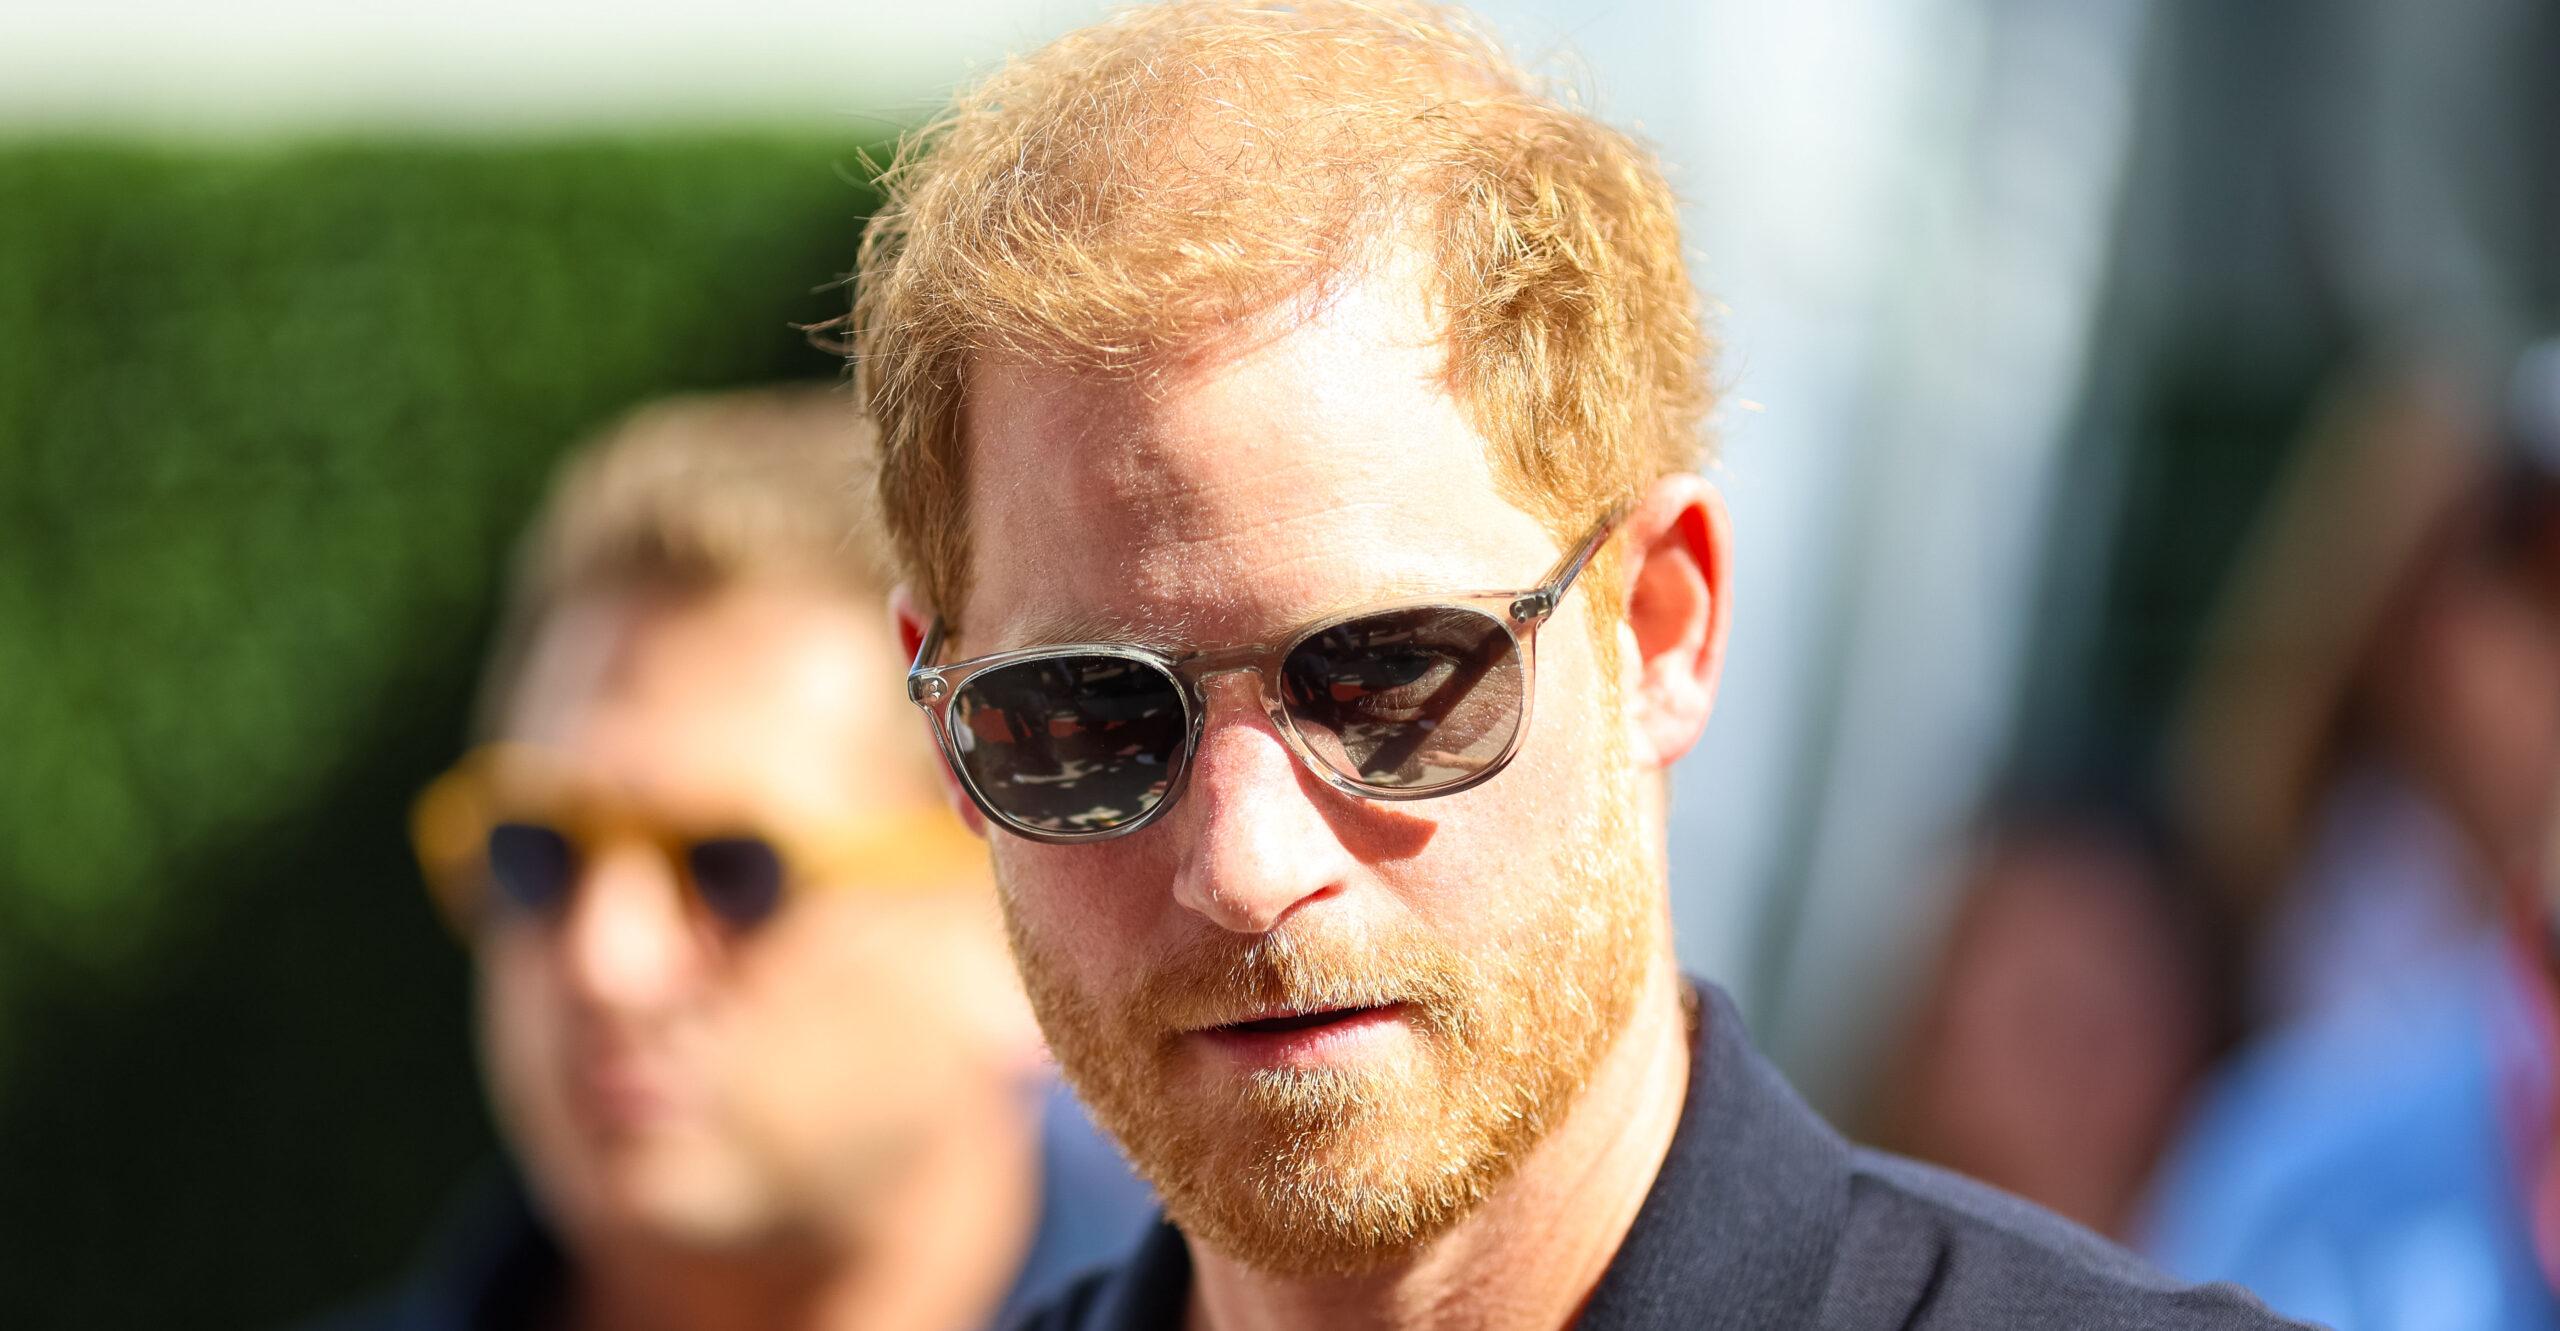 DC Court Hears Case of Prince Harry's Visa, Possible Deportation